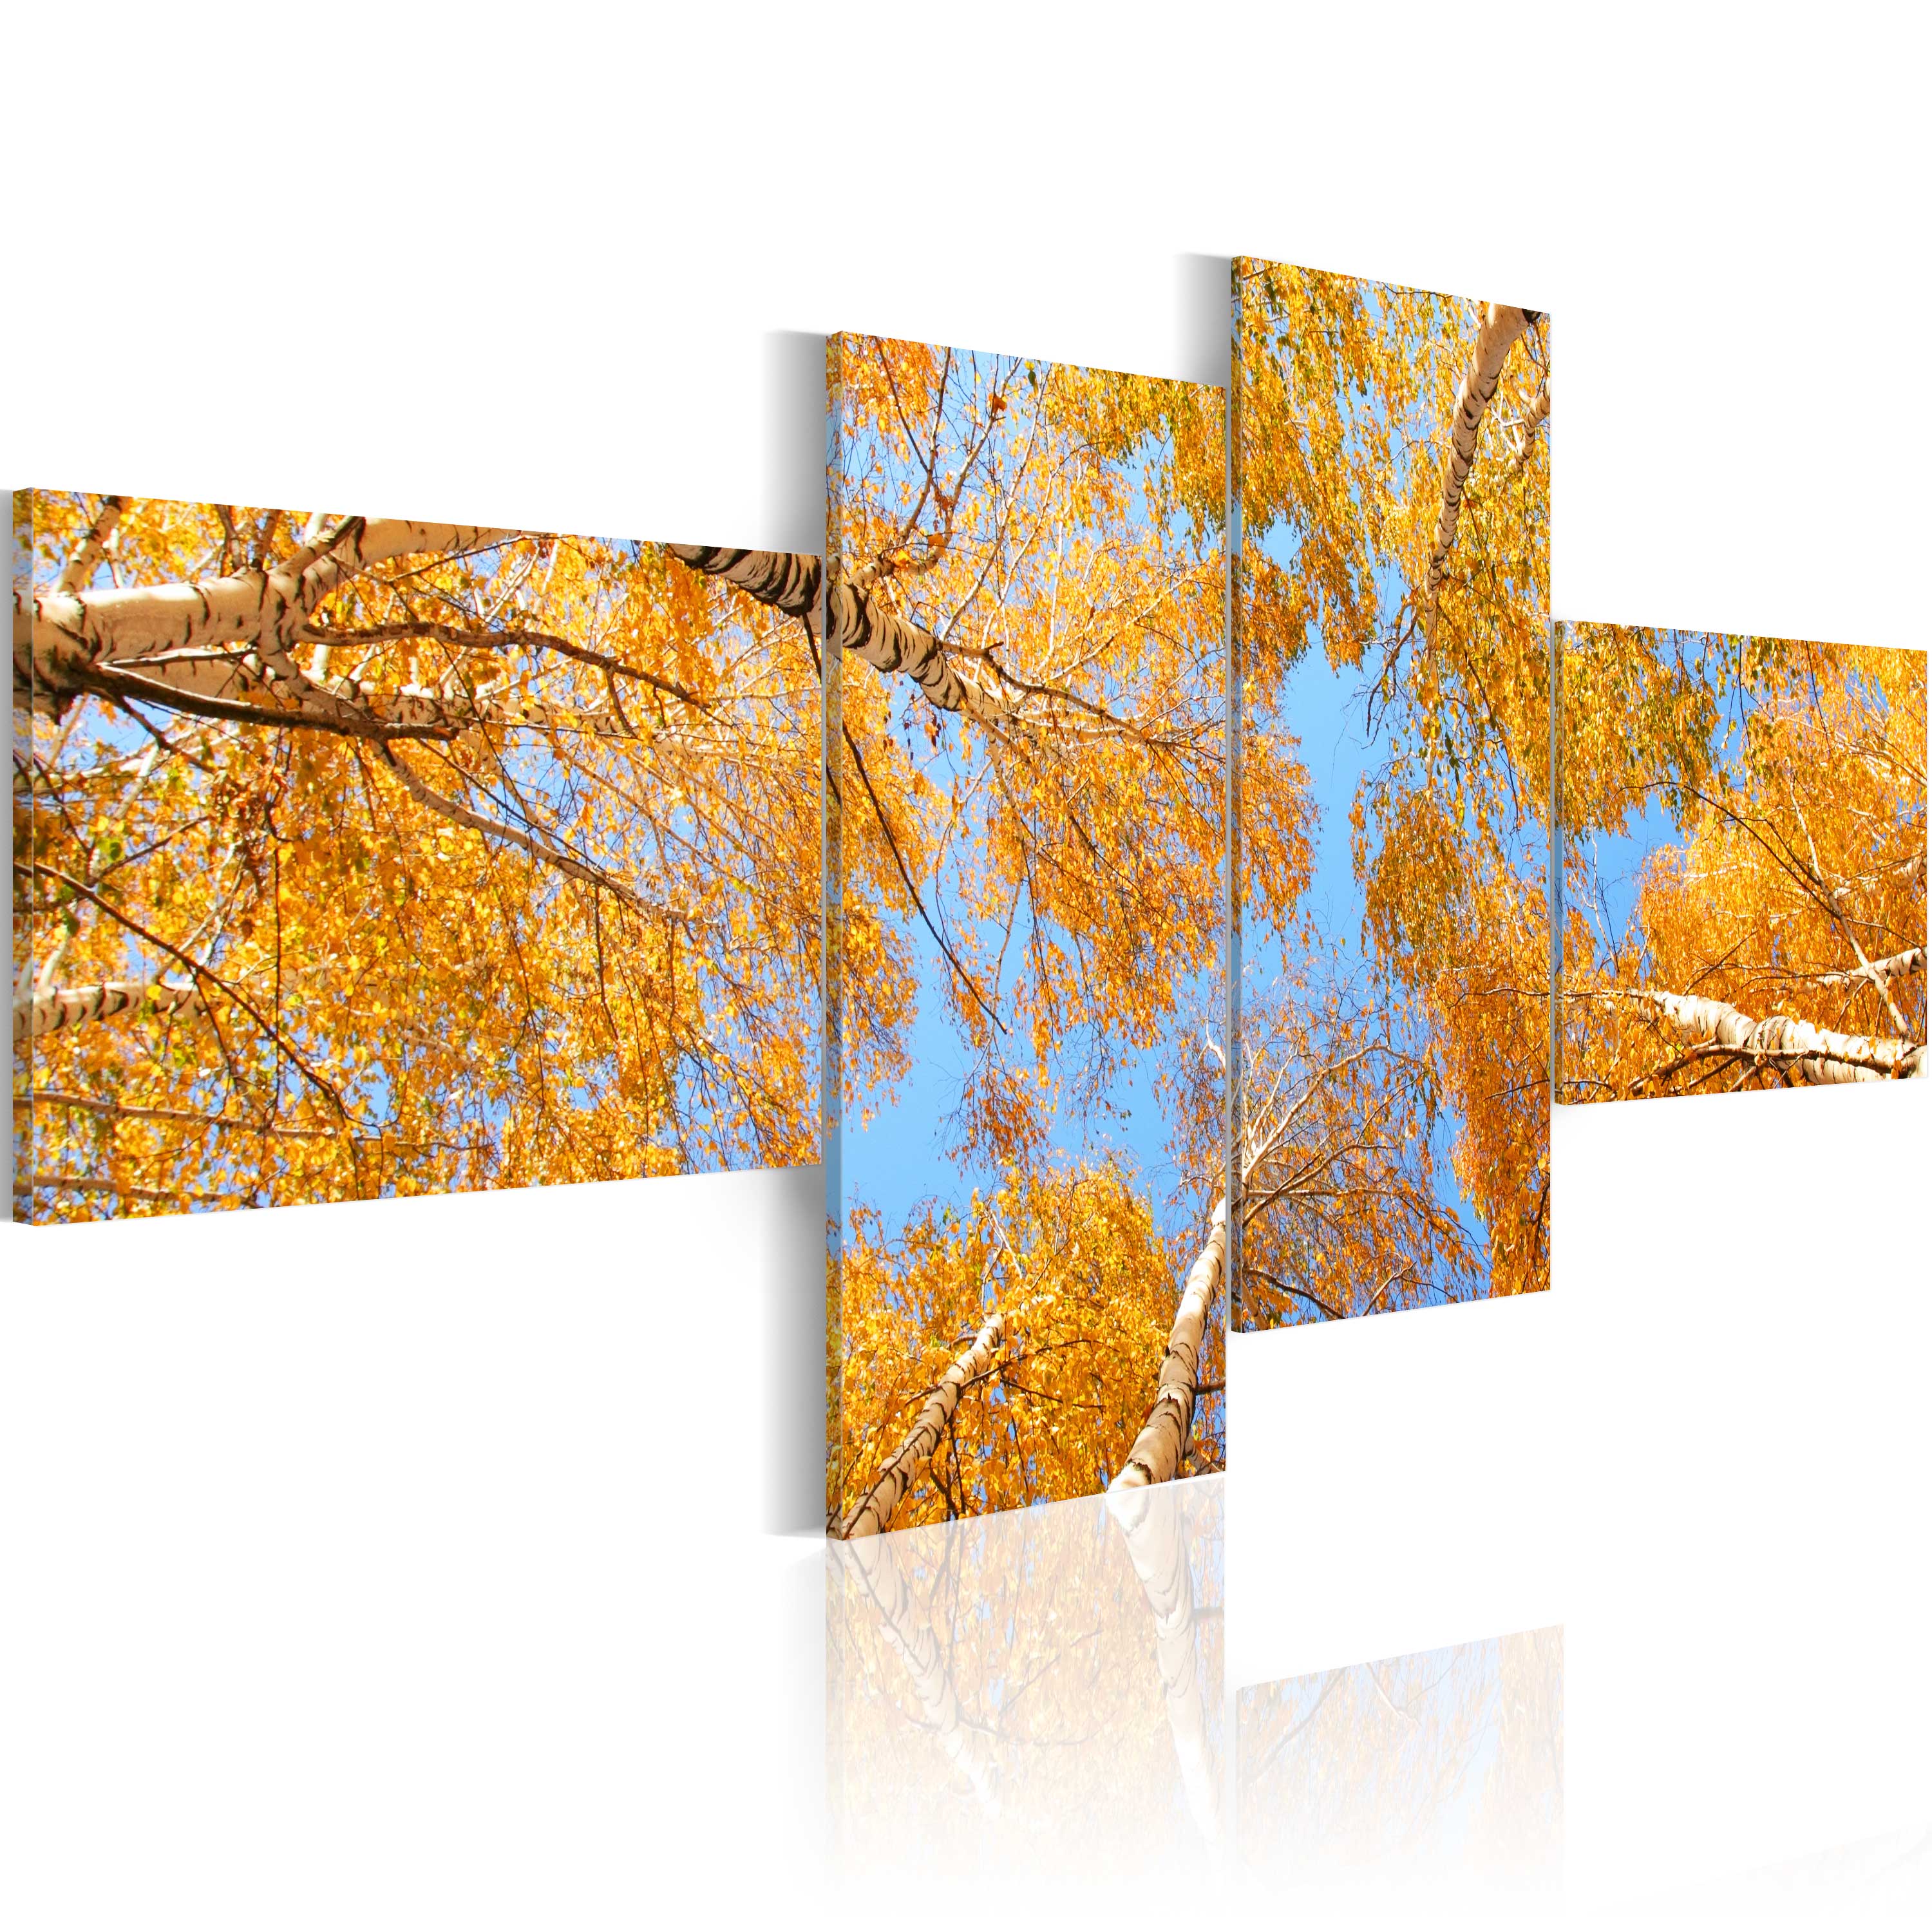 Canvas Print - Fall in the eyes of a dwarf - 100x45